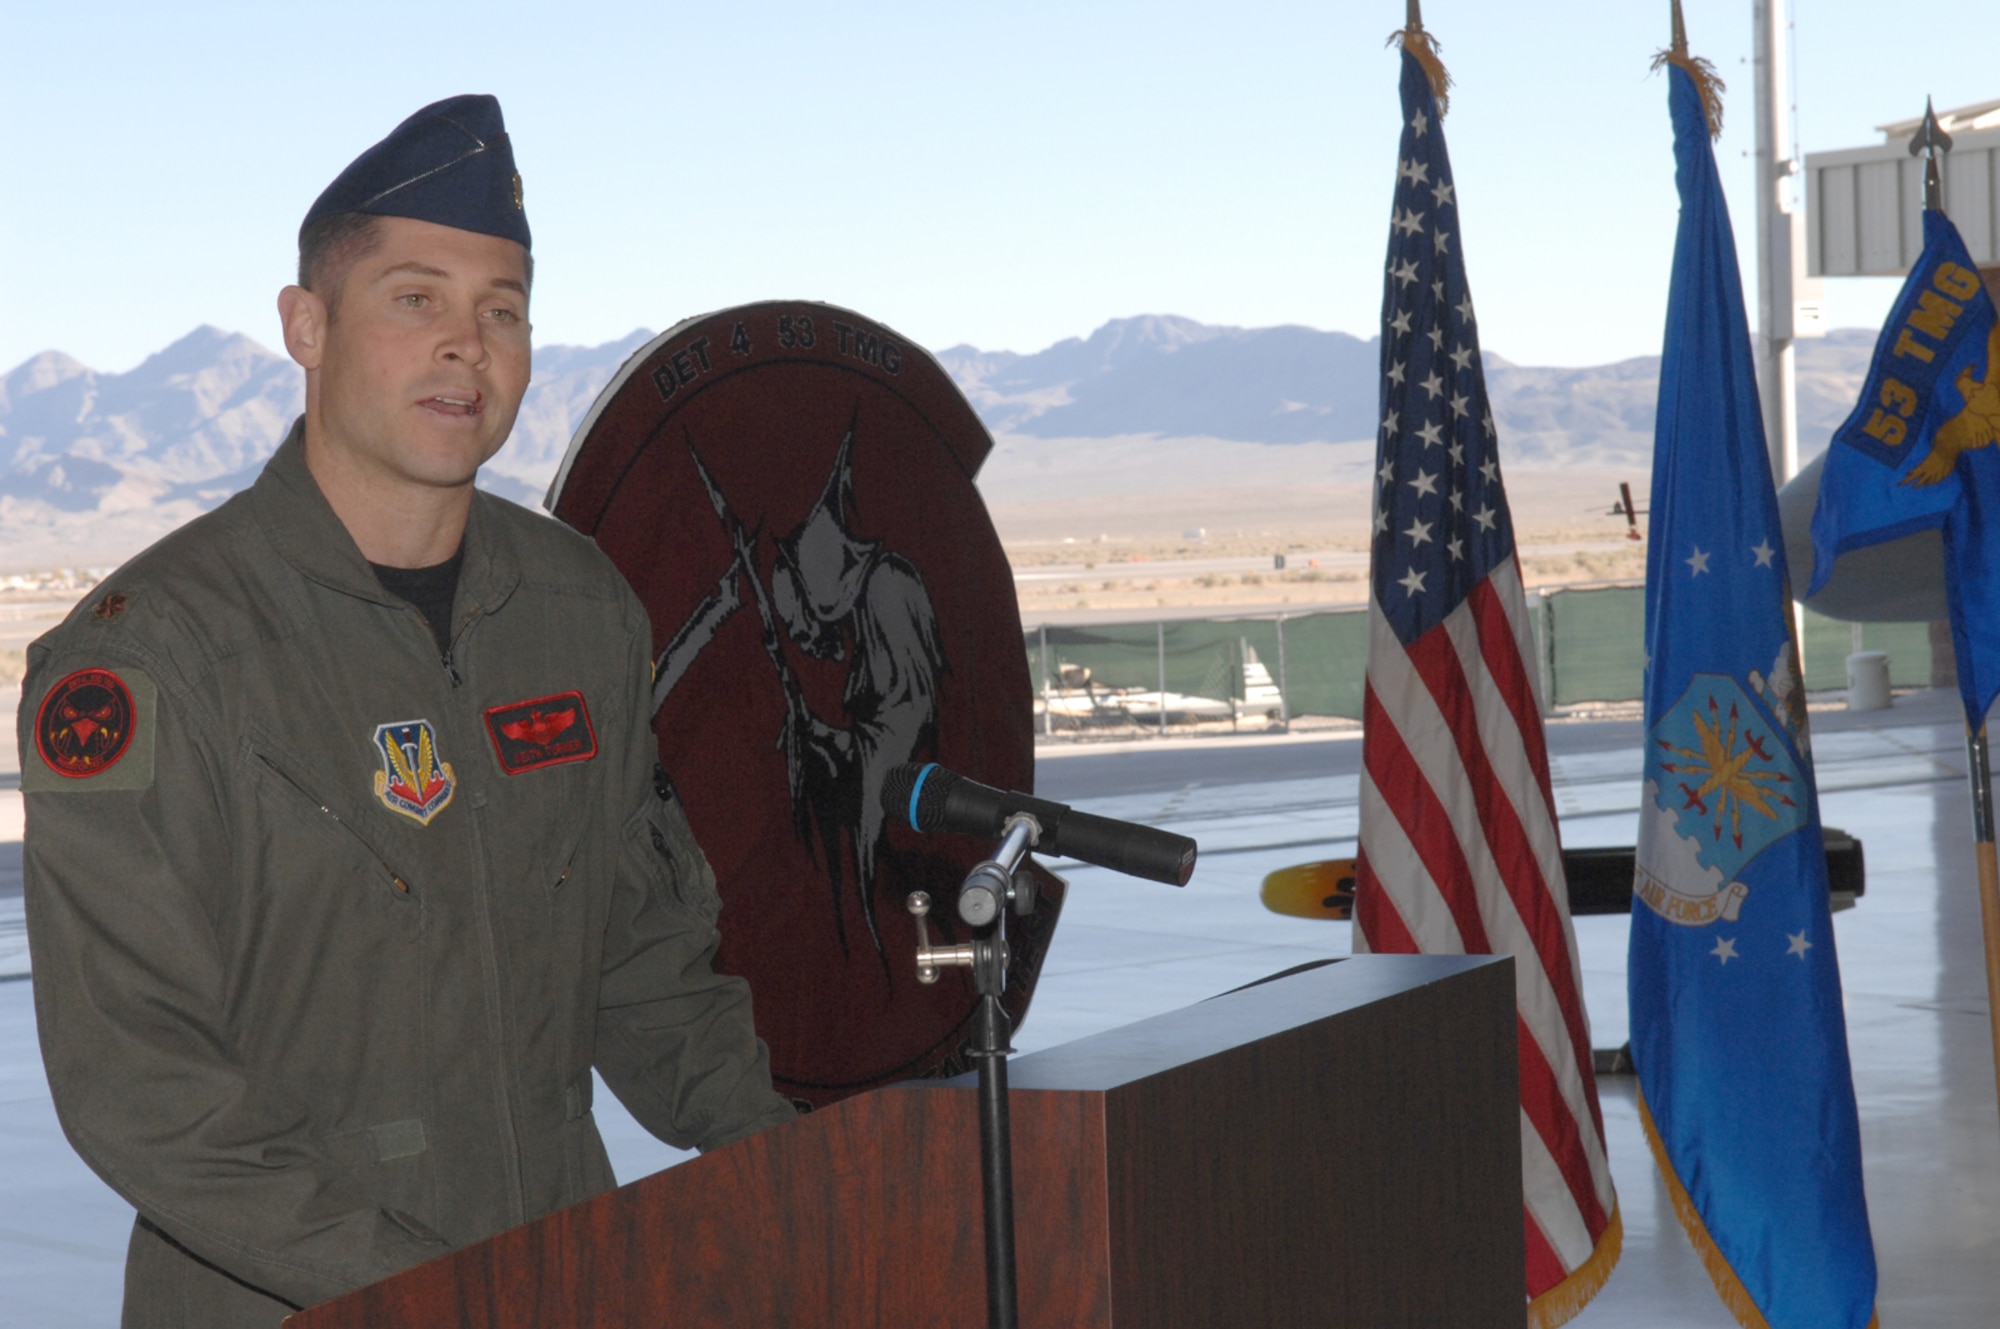 Incoming Commander, Major Keith R. Turner, speaks during the Detachment 4, 53rd Test Management Group Activation Ceremony November 1, 2007 Creech AFB, Nev.(U.S. Air Force Photo by Senior Airman Larry E. Reid Jr.)